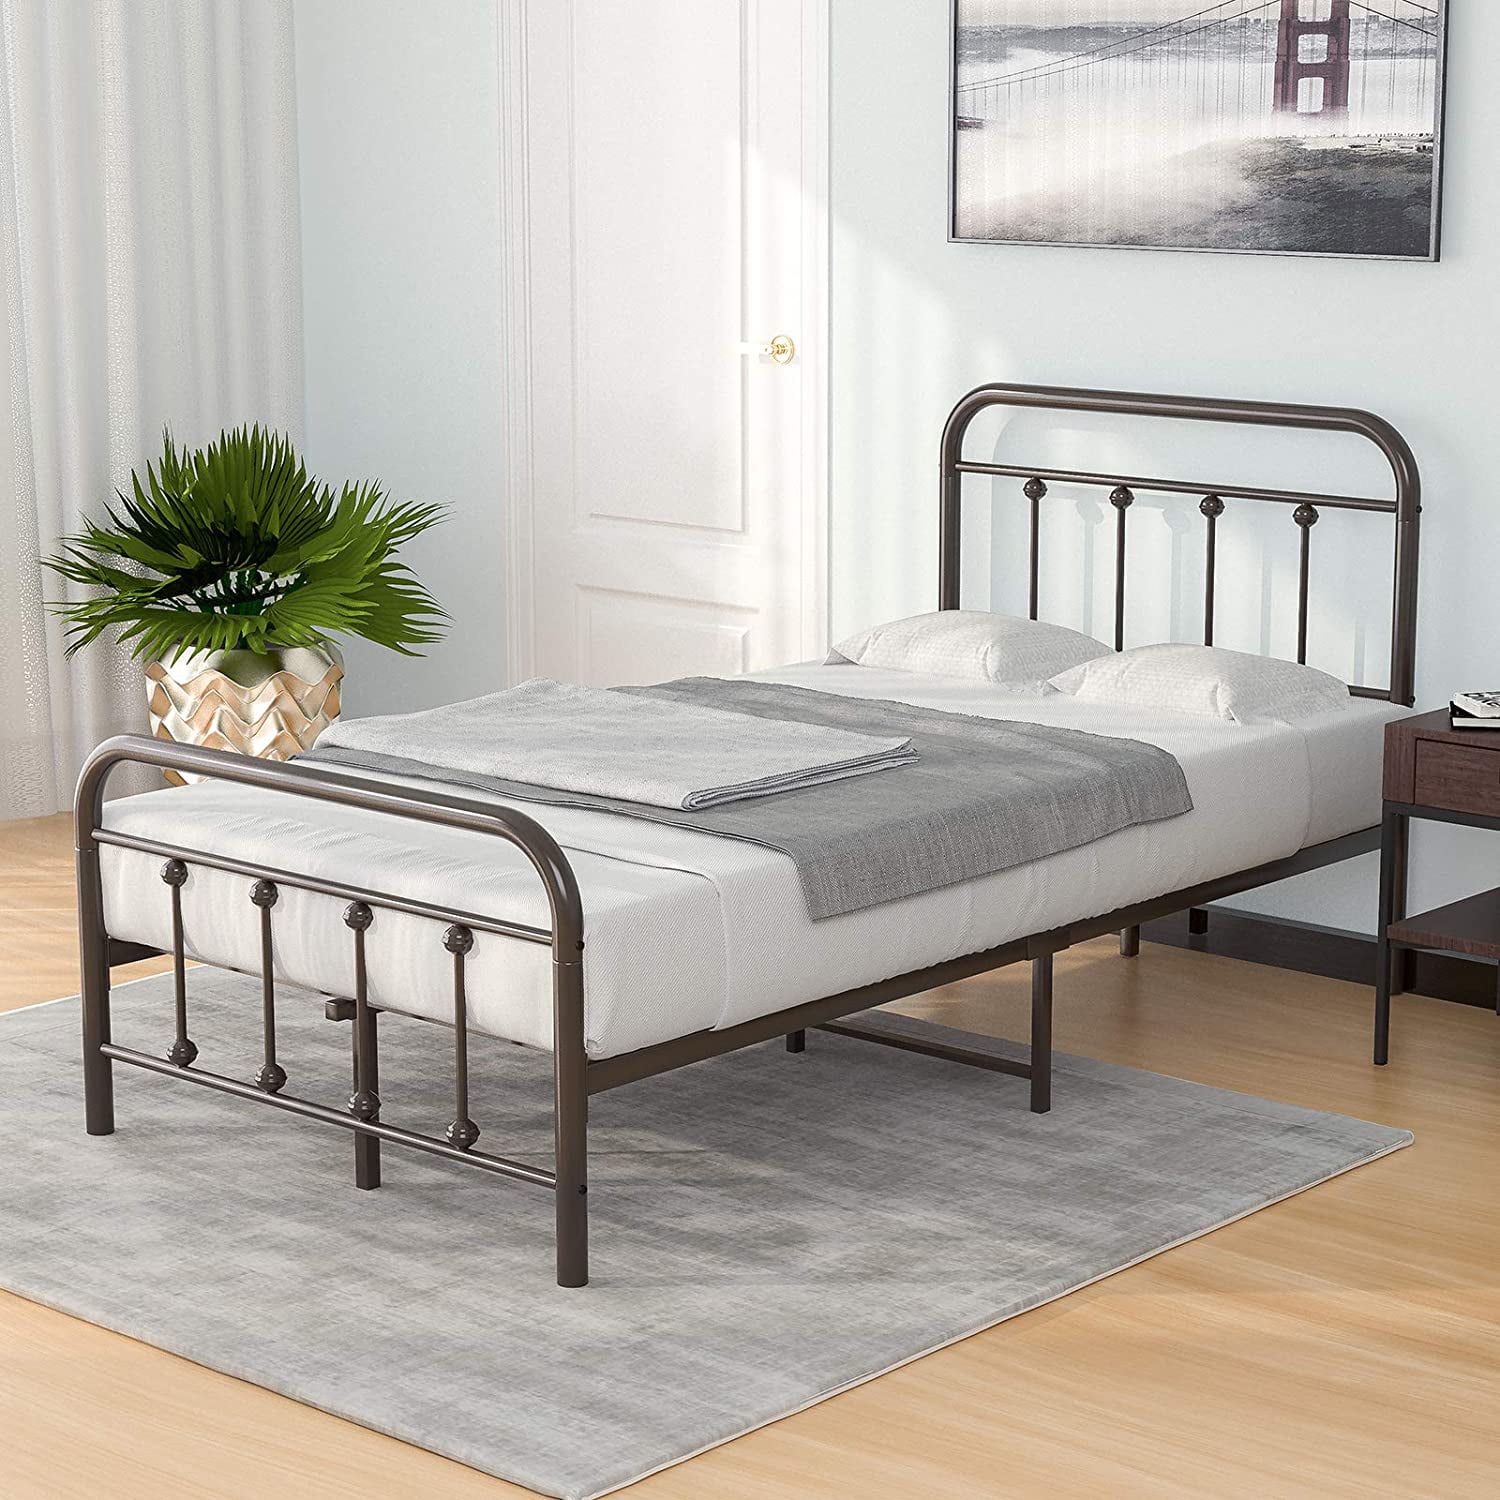 Mecor Metal Twin Bed Frame With Vintage, Vintage Twin Bed